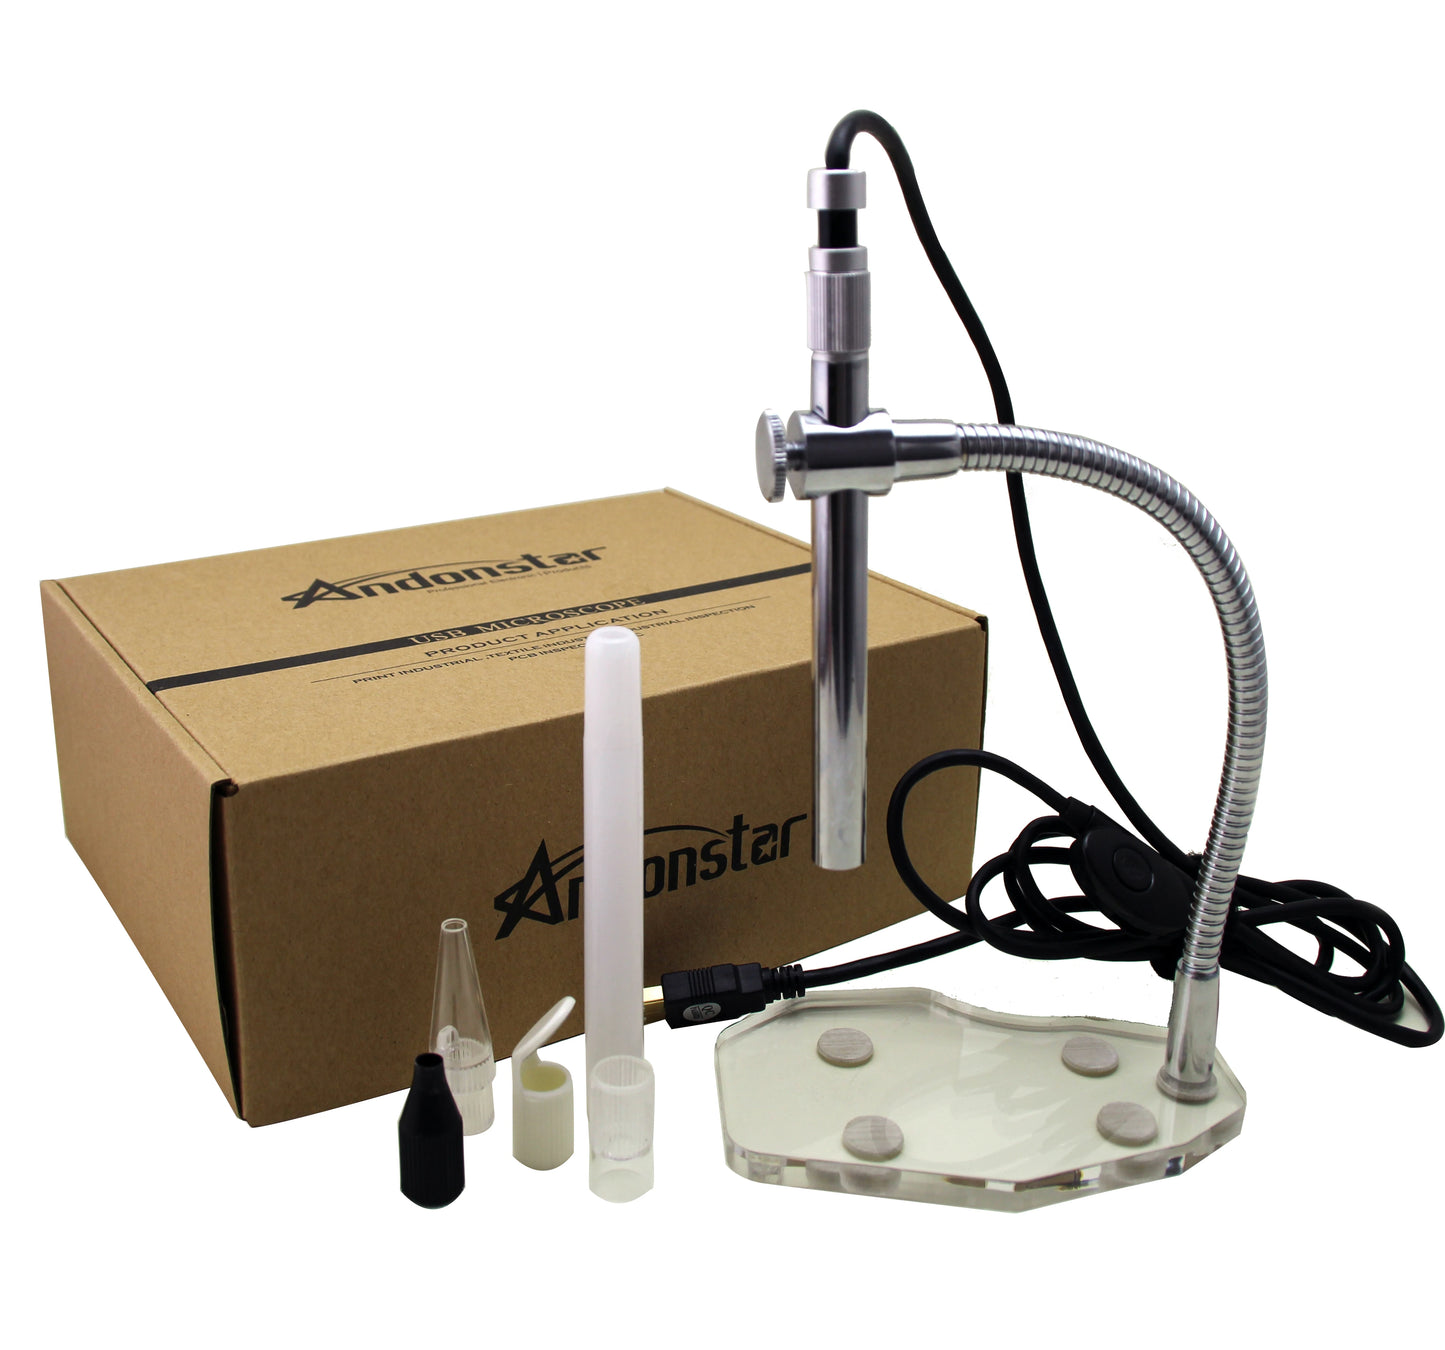 High-Definition 500X Andonstar USB Microscope - Perfect for Detailed Inspections"